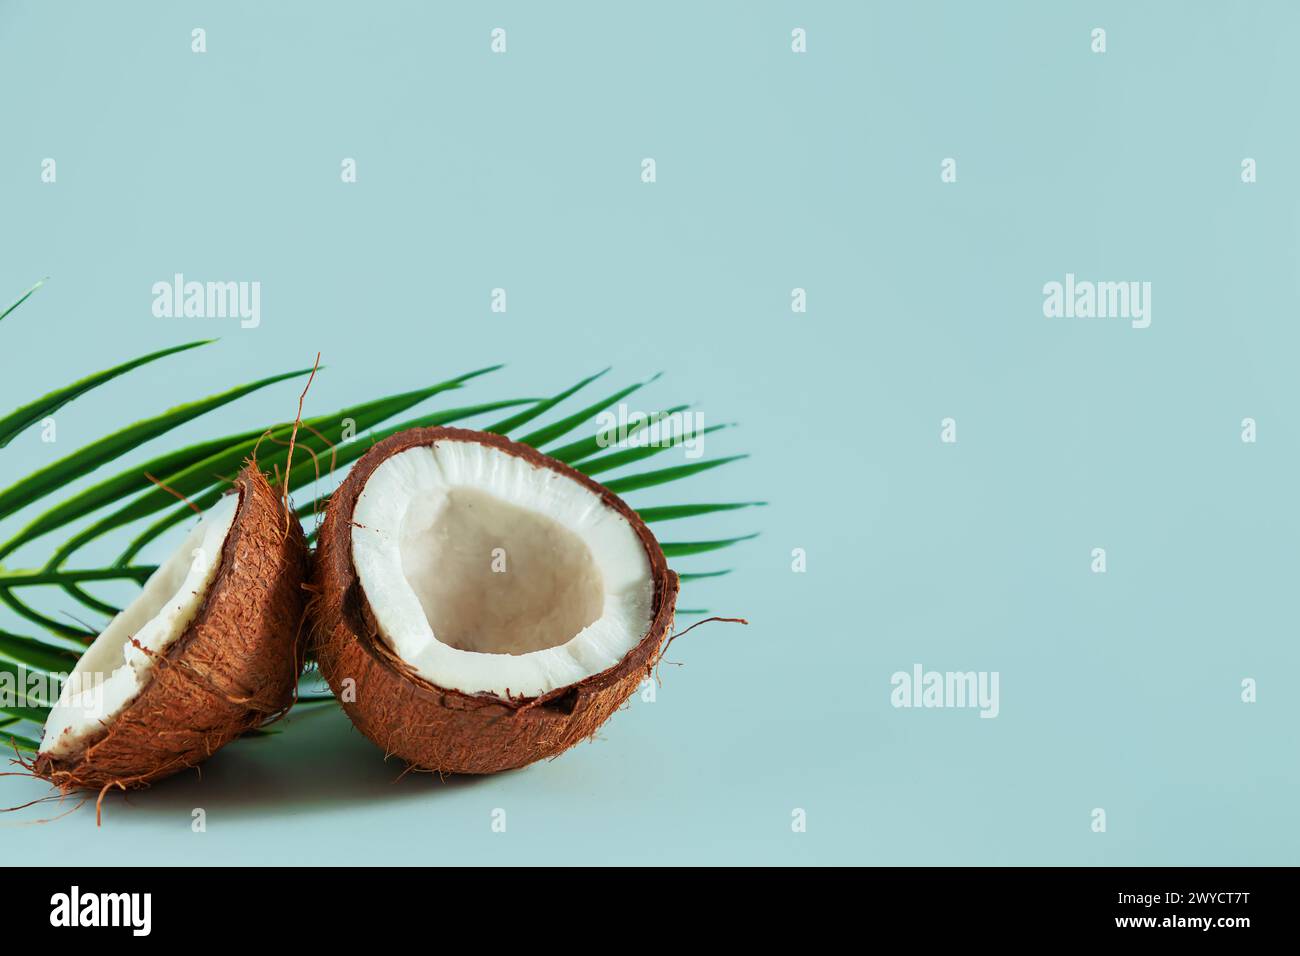 Broken coconut and palm leaf on a blue background. Summer background, copy space. Stock Photo